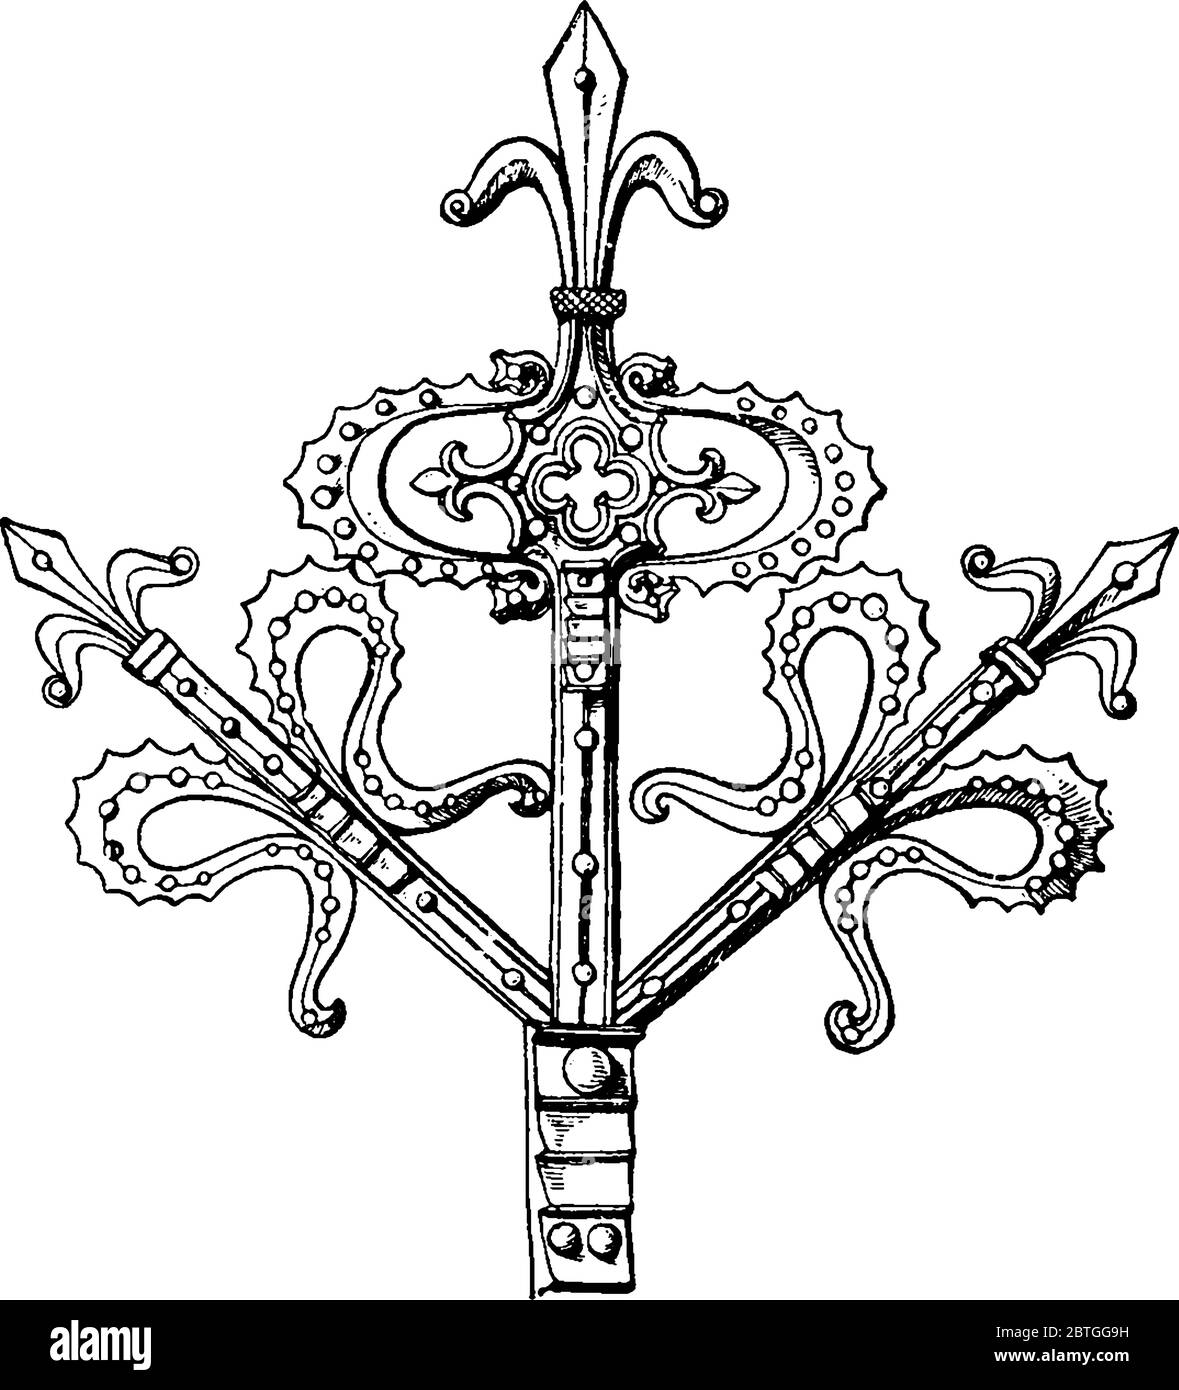 The gothic hinge, found on a church door in Viersen, Germany, is an extended strap hinge that is made of wrought metal-work, vintage line drawing or e Stock Vector